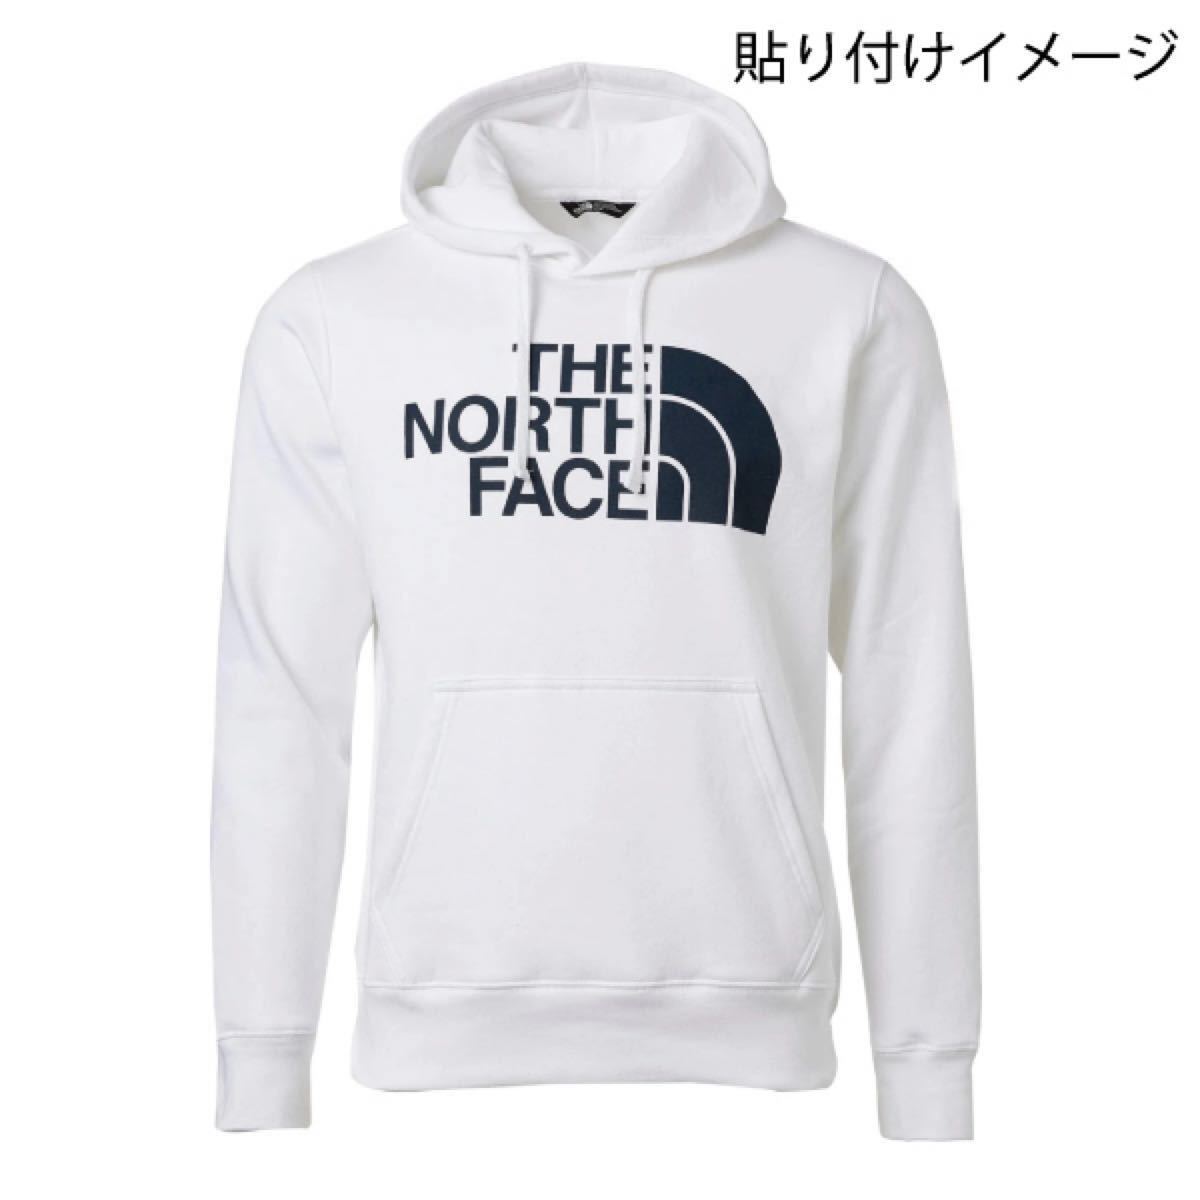 THE NORTH FACE ビッグロゴ【熱転写アイロンシート 紺】即購入可